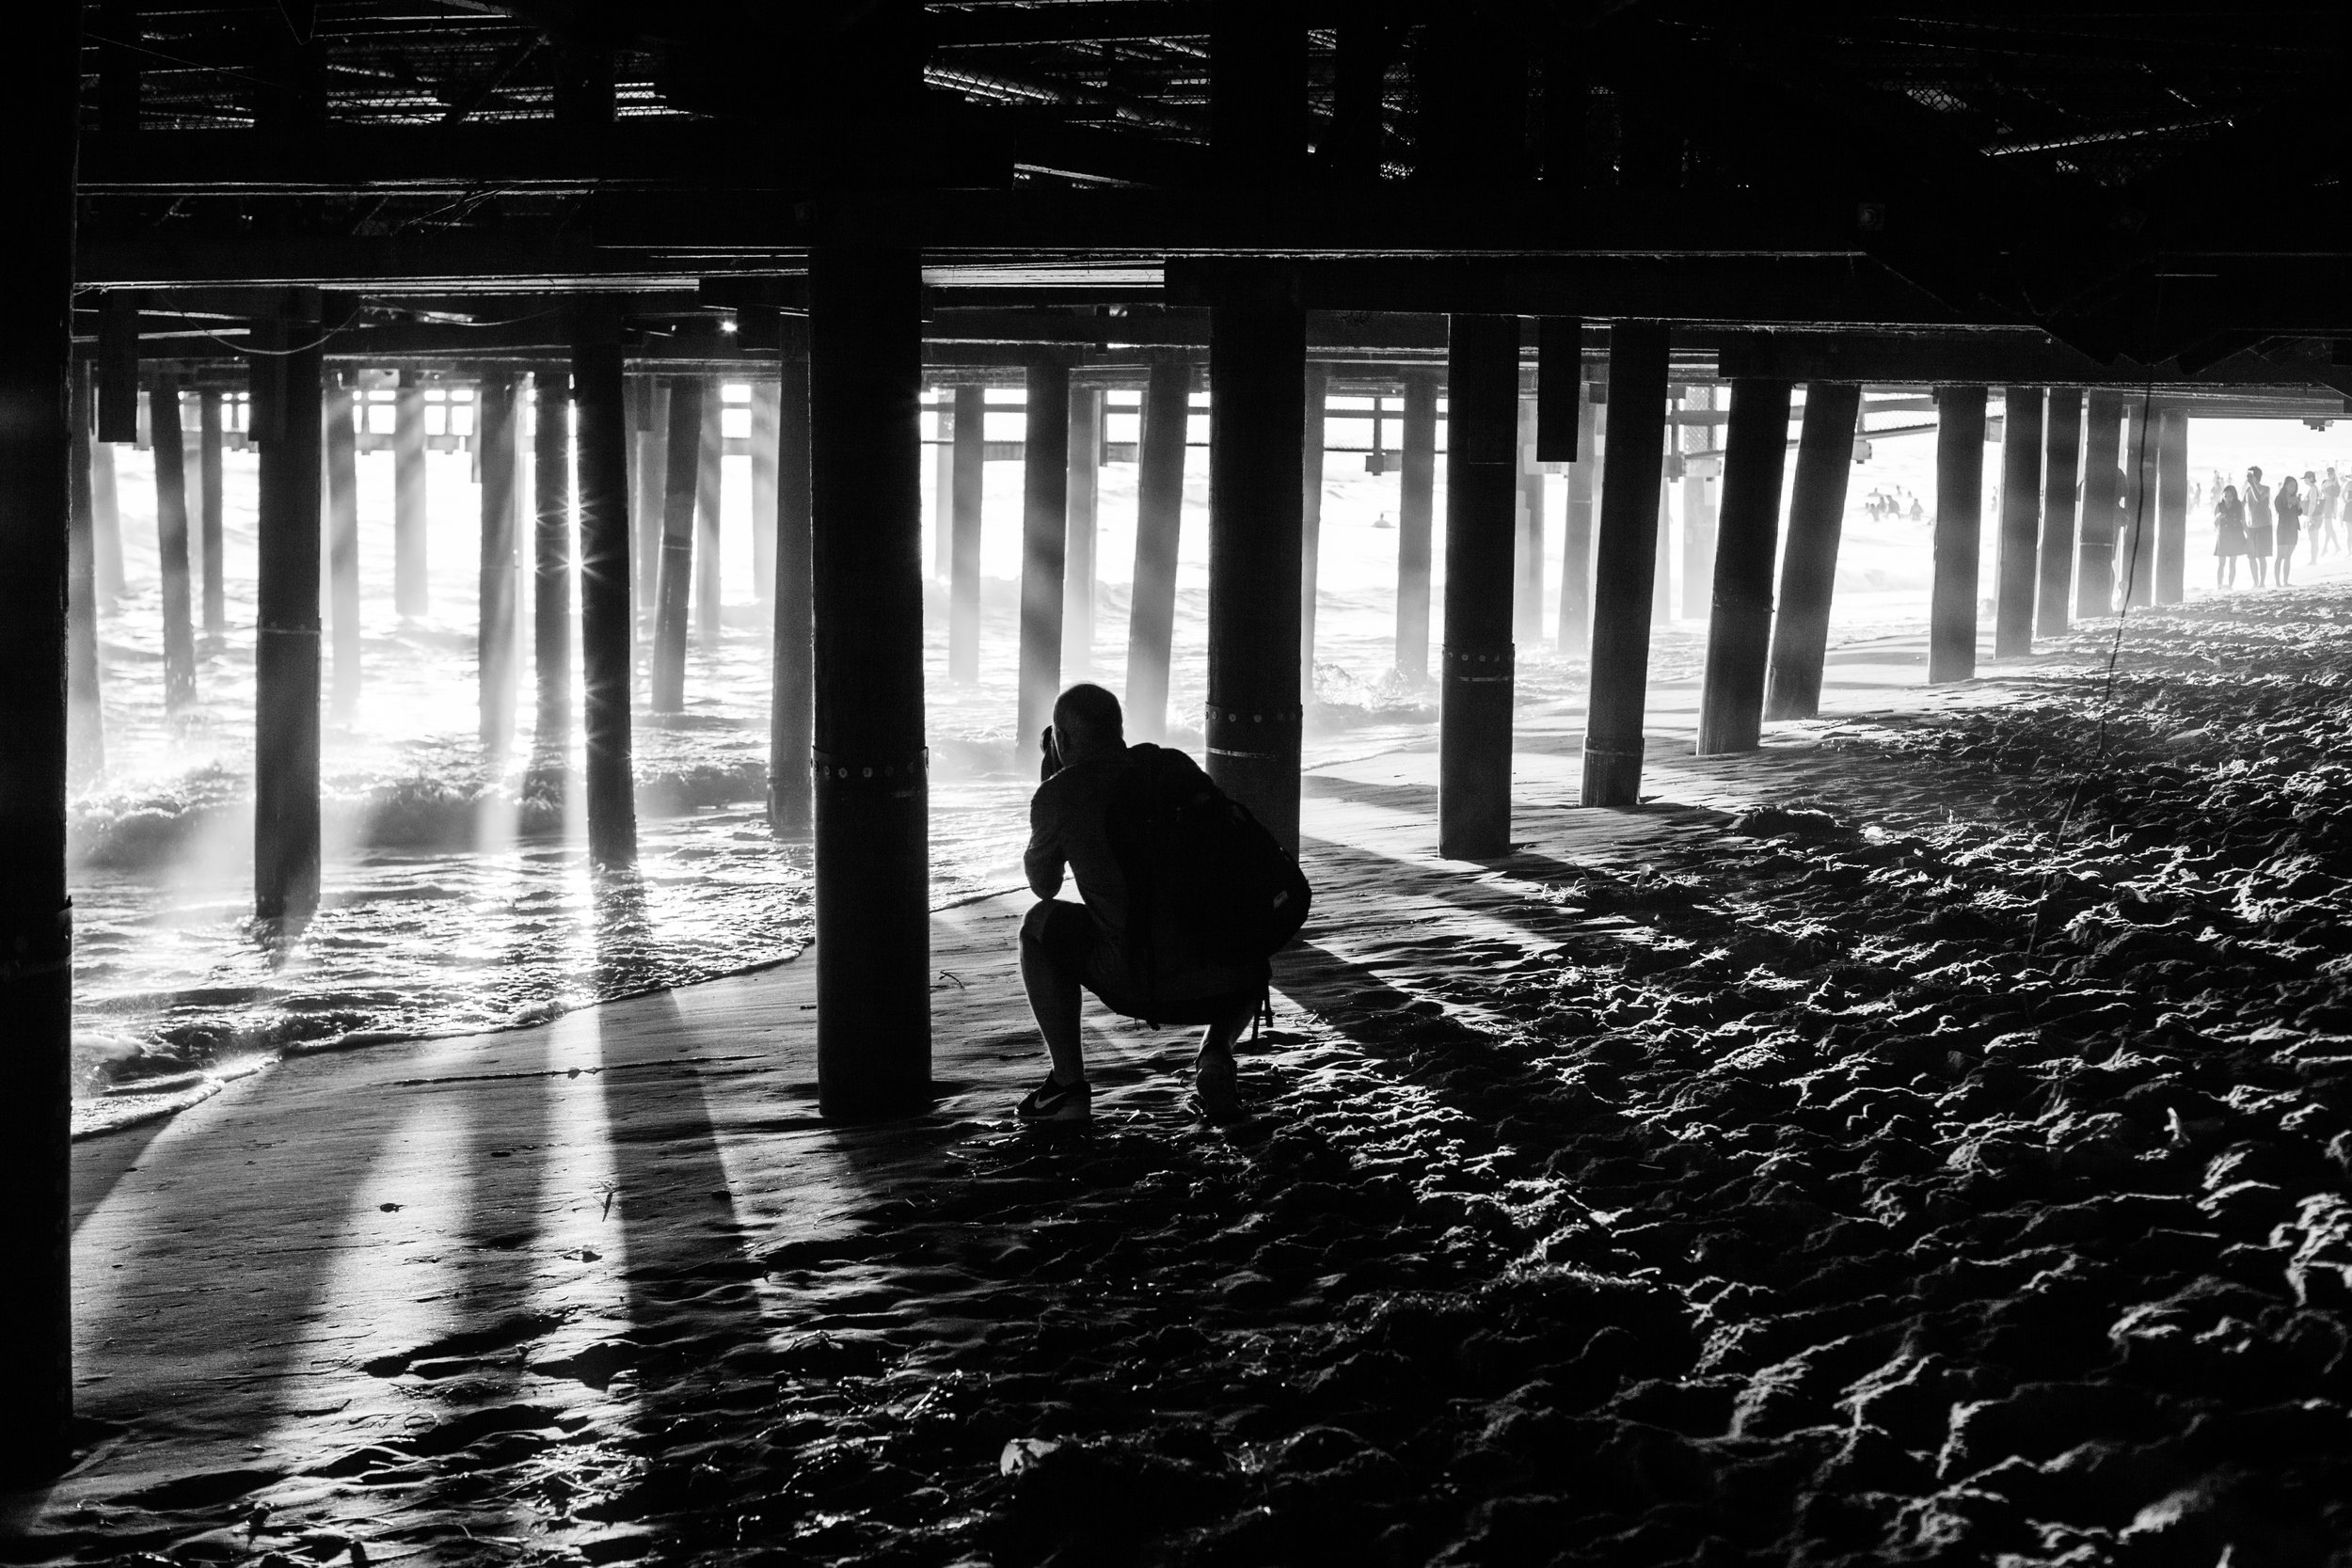 An artistic black and white image in California by Geraint Rowland.